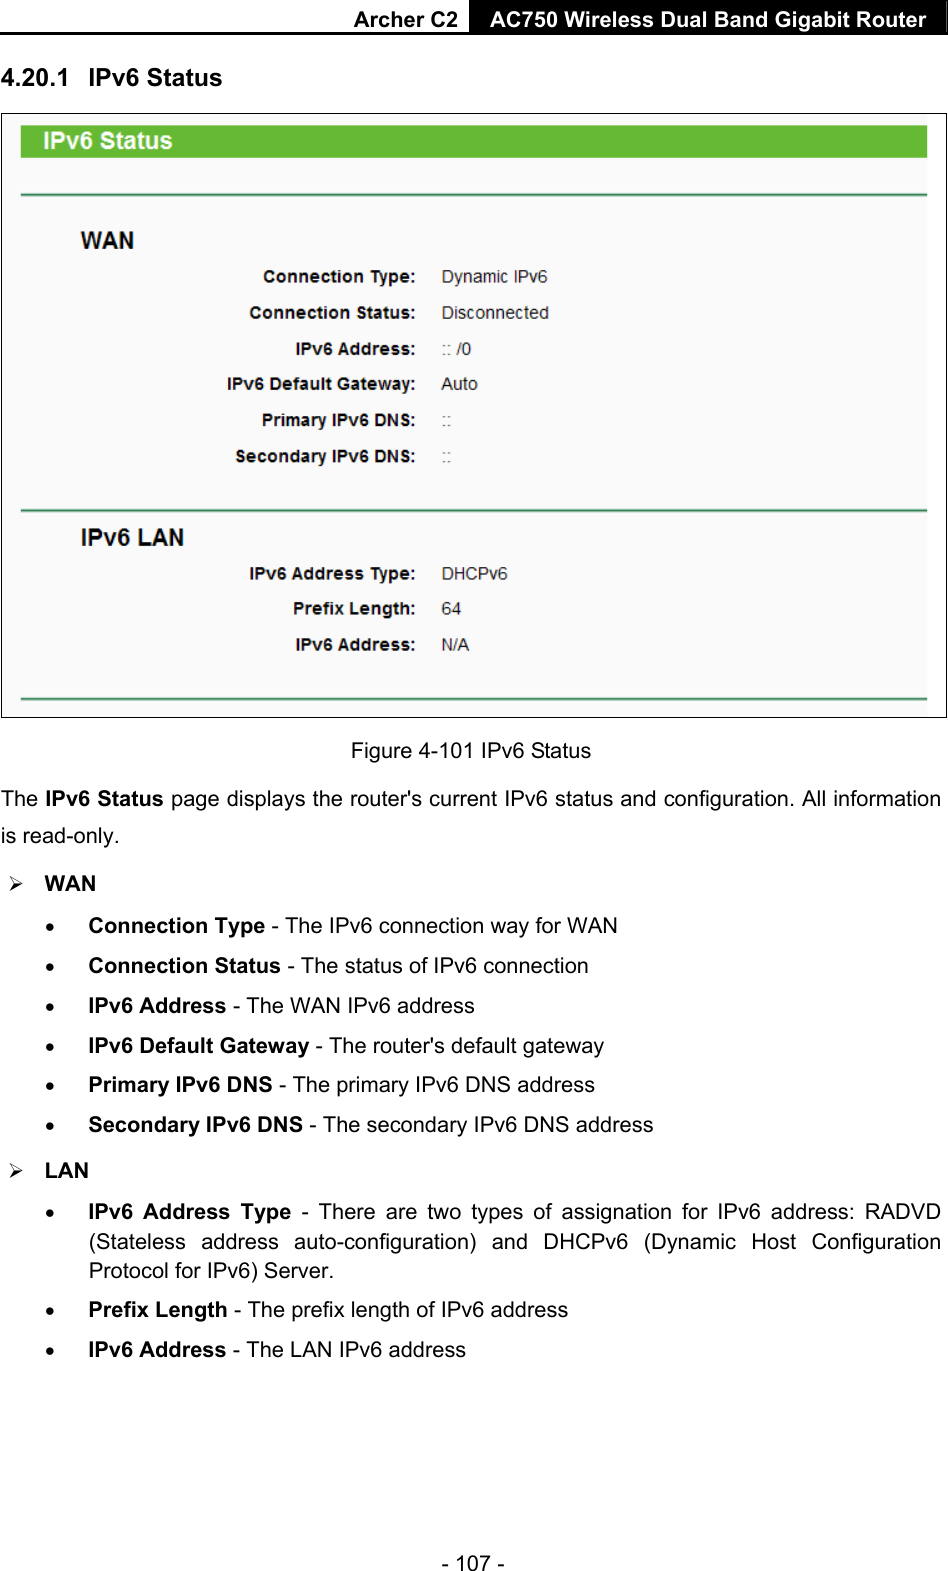 Archer C2 AC750 Wireless Dual Band Gigabit Router  - 107 - 4.20.1  IPv6 Status  Figure 4-101 IPv6 Status The IPv6 Status page displays the router&apos;s current IPv6 status and configuration. All information is read-only.    WAN    Connection Type - The IPv6 connection way for WAN  Connection Status - The status of IPv6 connection  IPv6 Address - The WAN IPv6 address  IPv6 Default Gateway - The router&apos;s default gateway  Primary IPv6 DNS - The primary IPv6 DNS address  Secondary IPv6 DNS - The secondary IPv6 DNS address  LAN  IPv6 Address Type - There are two types of assignation for IPv6 address: RADVD (Stateless address auto-configuration) and DHCPv6 (Dynamic Host Configuration Protocol for IPv6) Server.  Prefix Length - The prefix length of IPv6 address  IPv6 Address - The LAN IPv6 address 